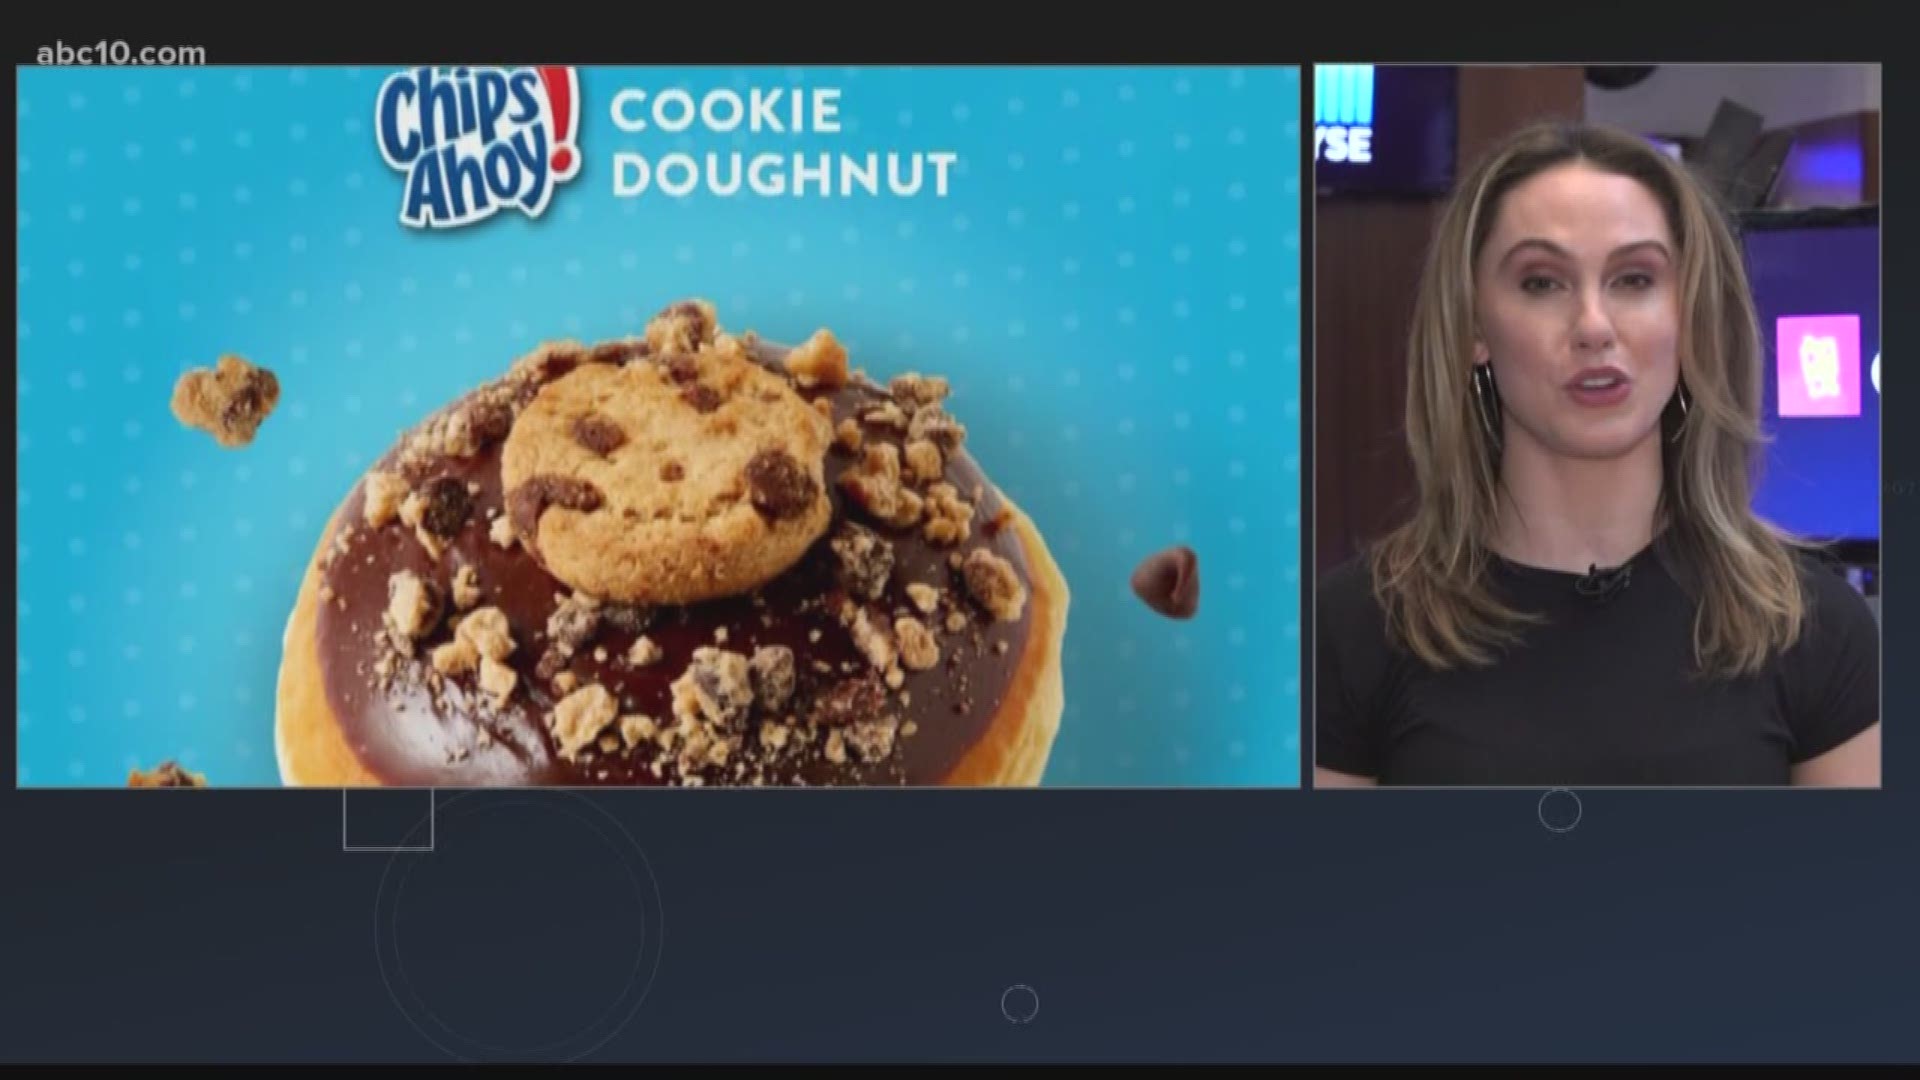 Hulu and Spotify are launching a new $13 per month subscription plan. Former speaker of the House is joining the advisory board of a marijuana firm. Krispy Kreme launched three special addition doughnuts. 